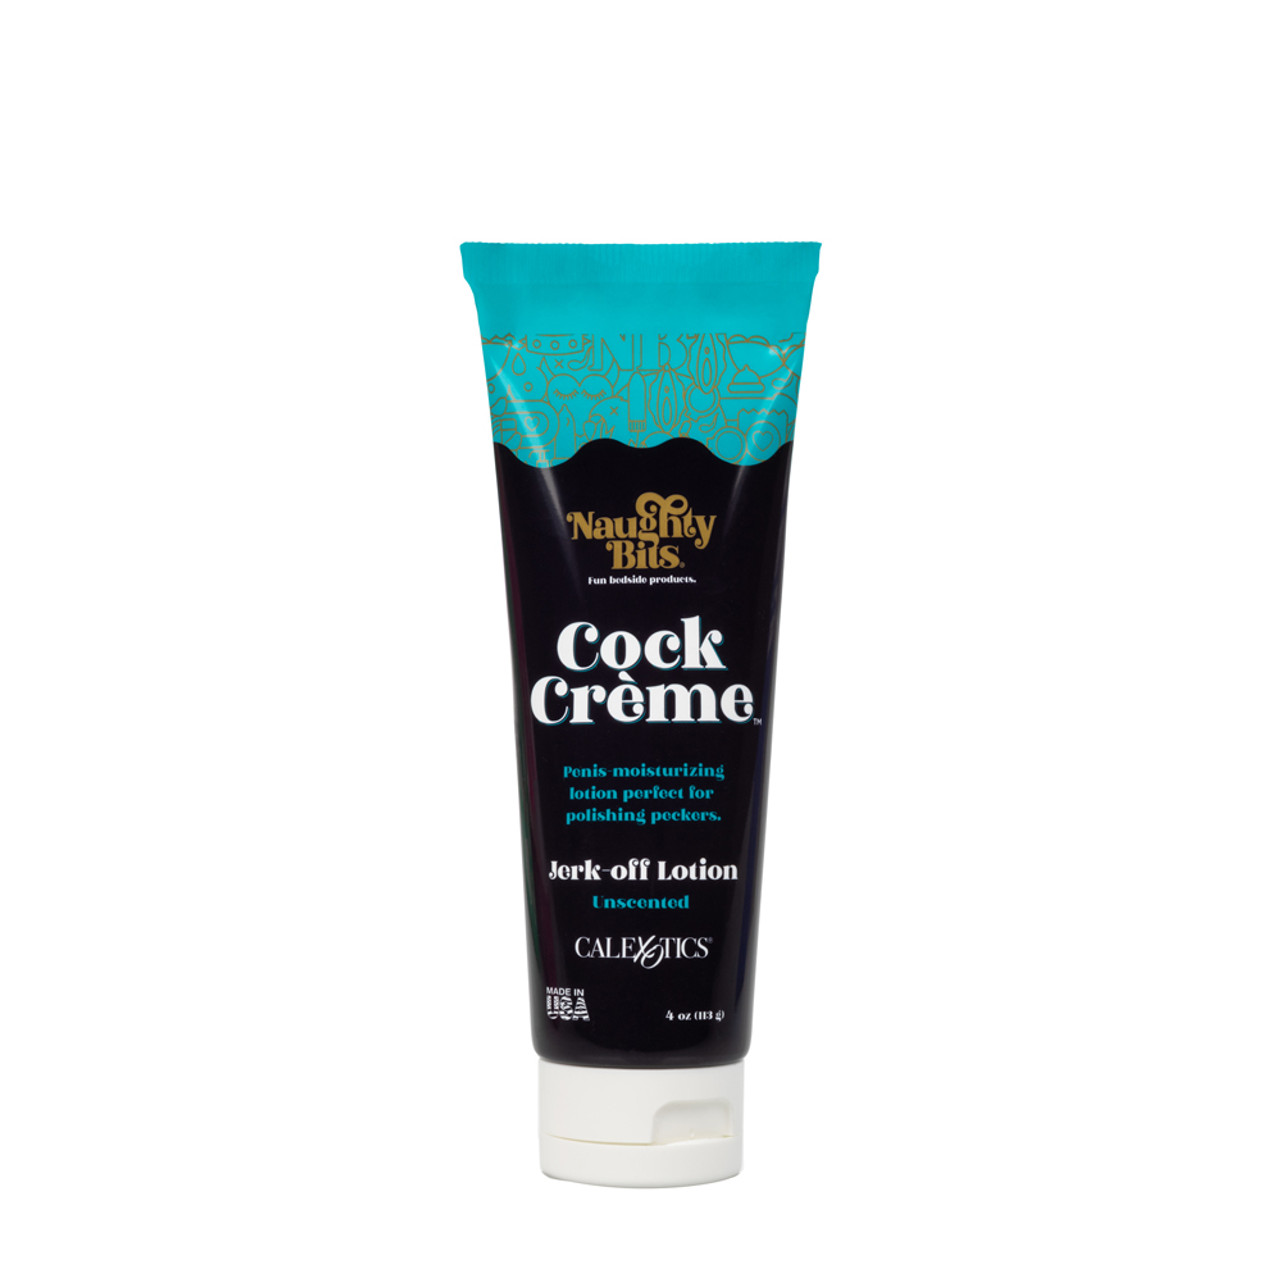 alison hurrell recommends good lotion for masturbation pic